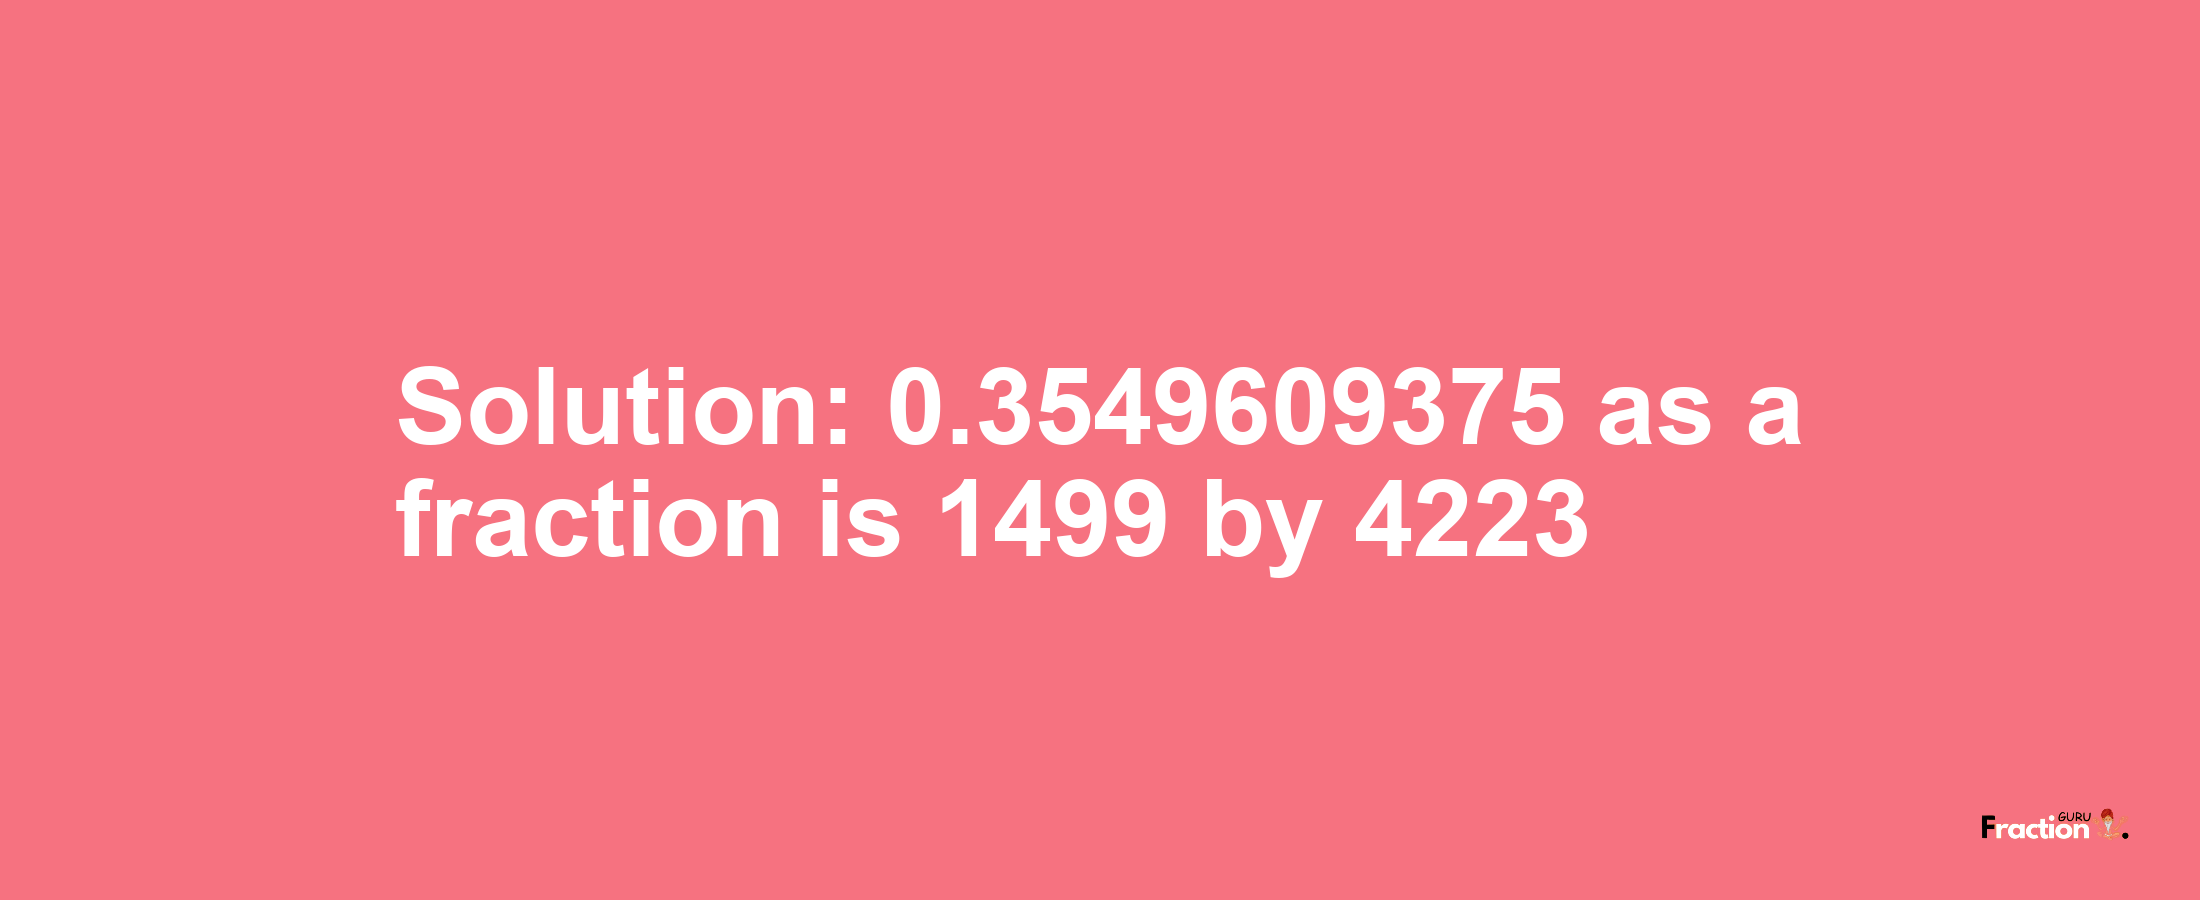 Solution:0.3549609375 as a fraction is 1499/4223